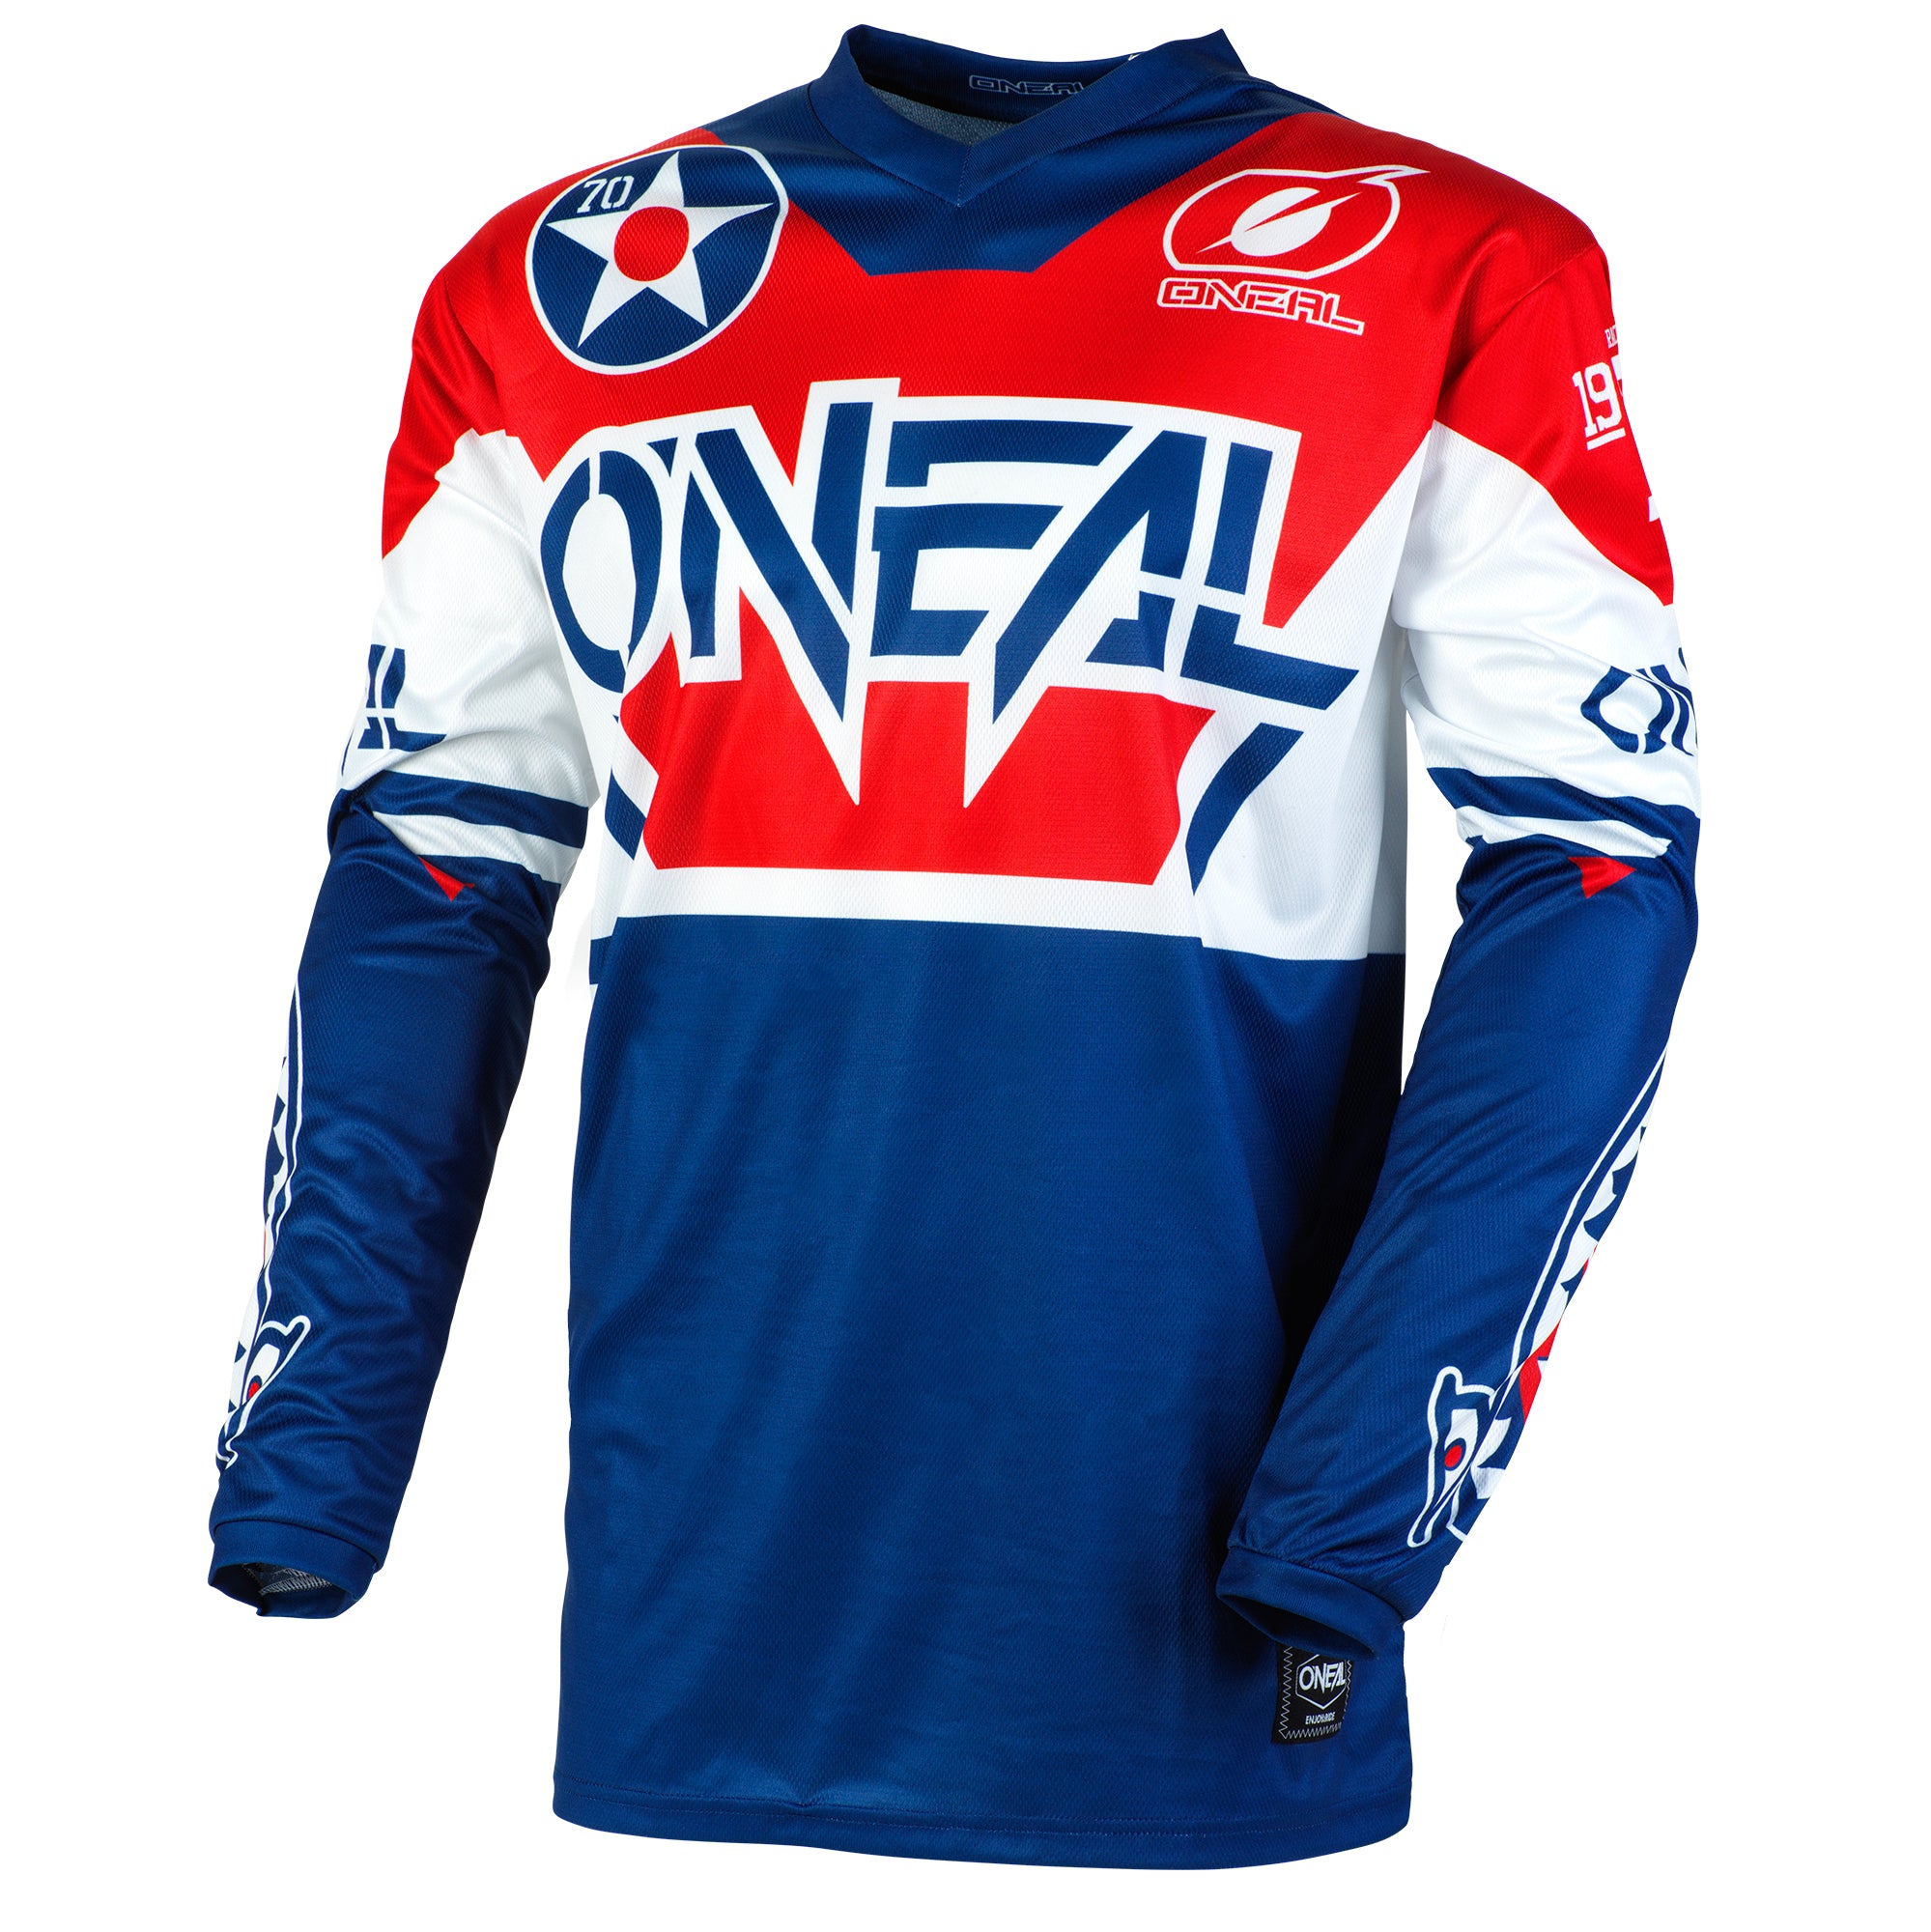 O'NEAL Element Dirt Jersey Black/Gray – ONEAL USA